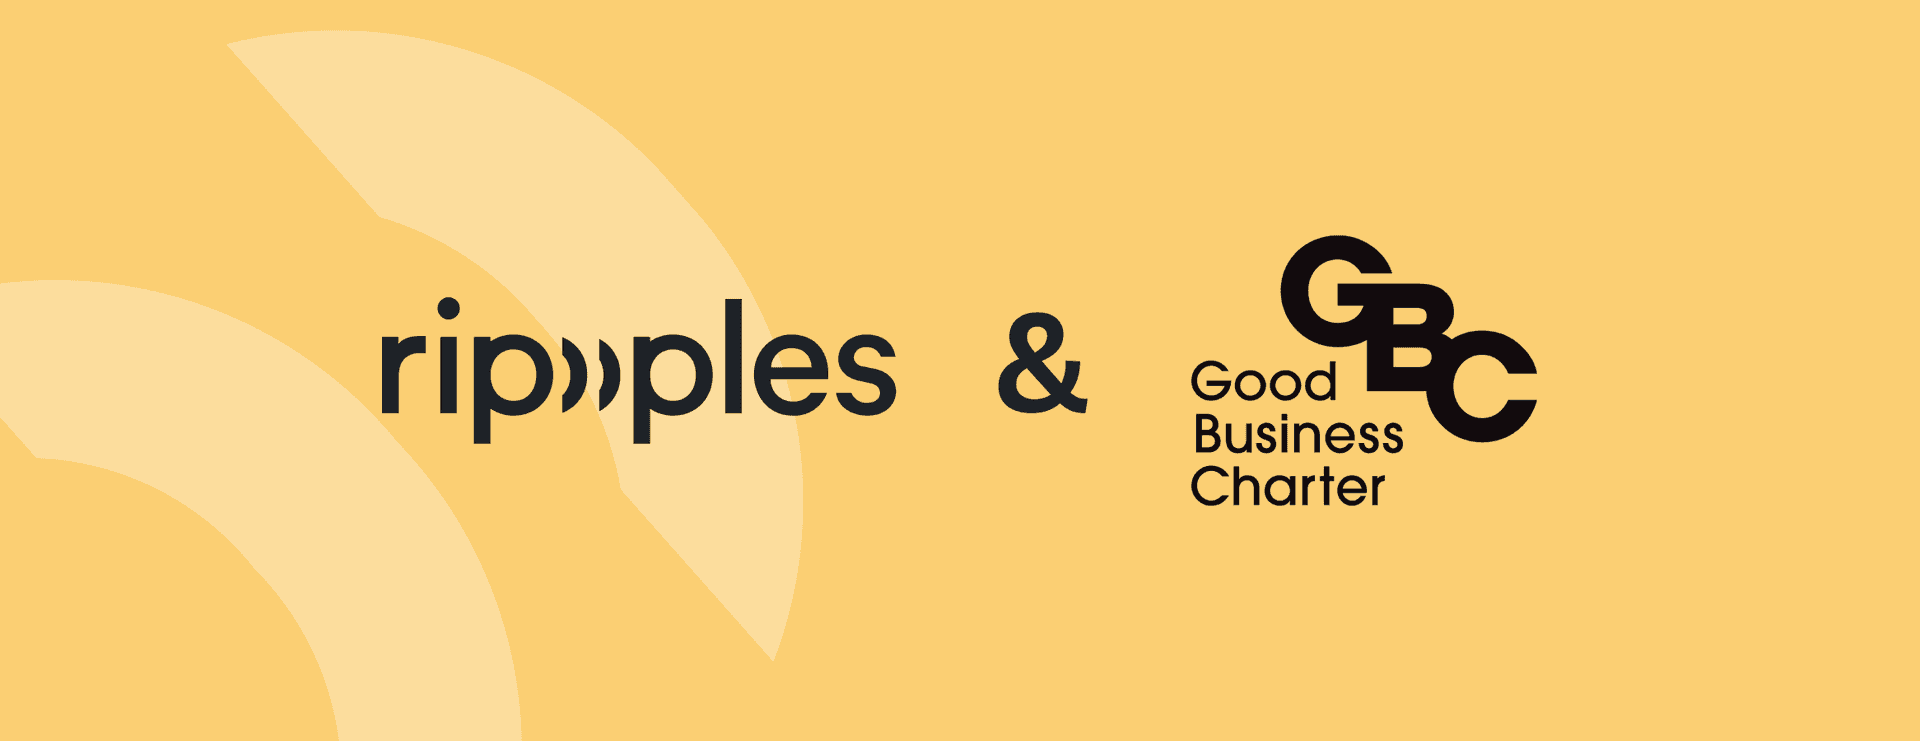 Ripples Joins The Good Business Charter-featured-image